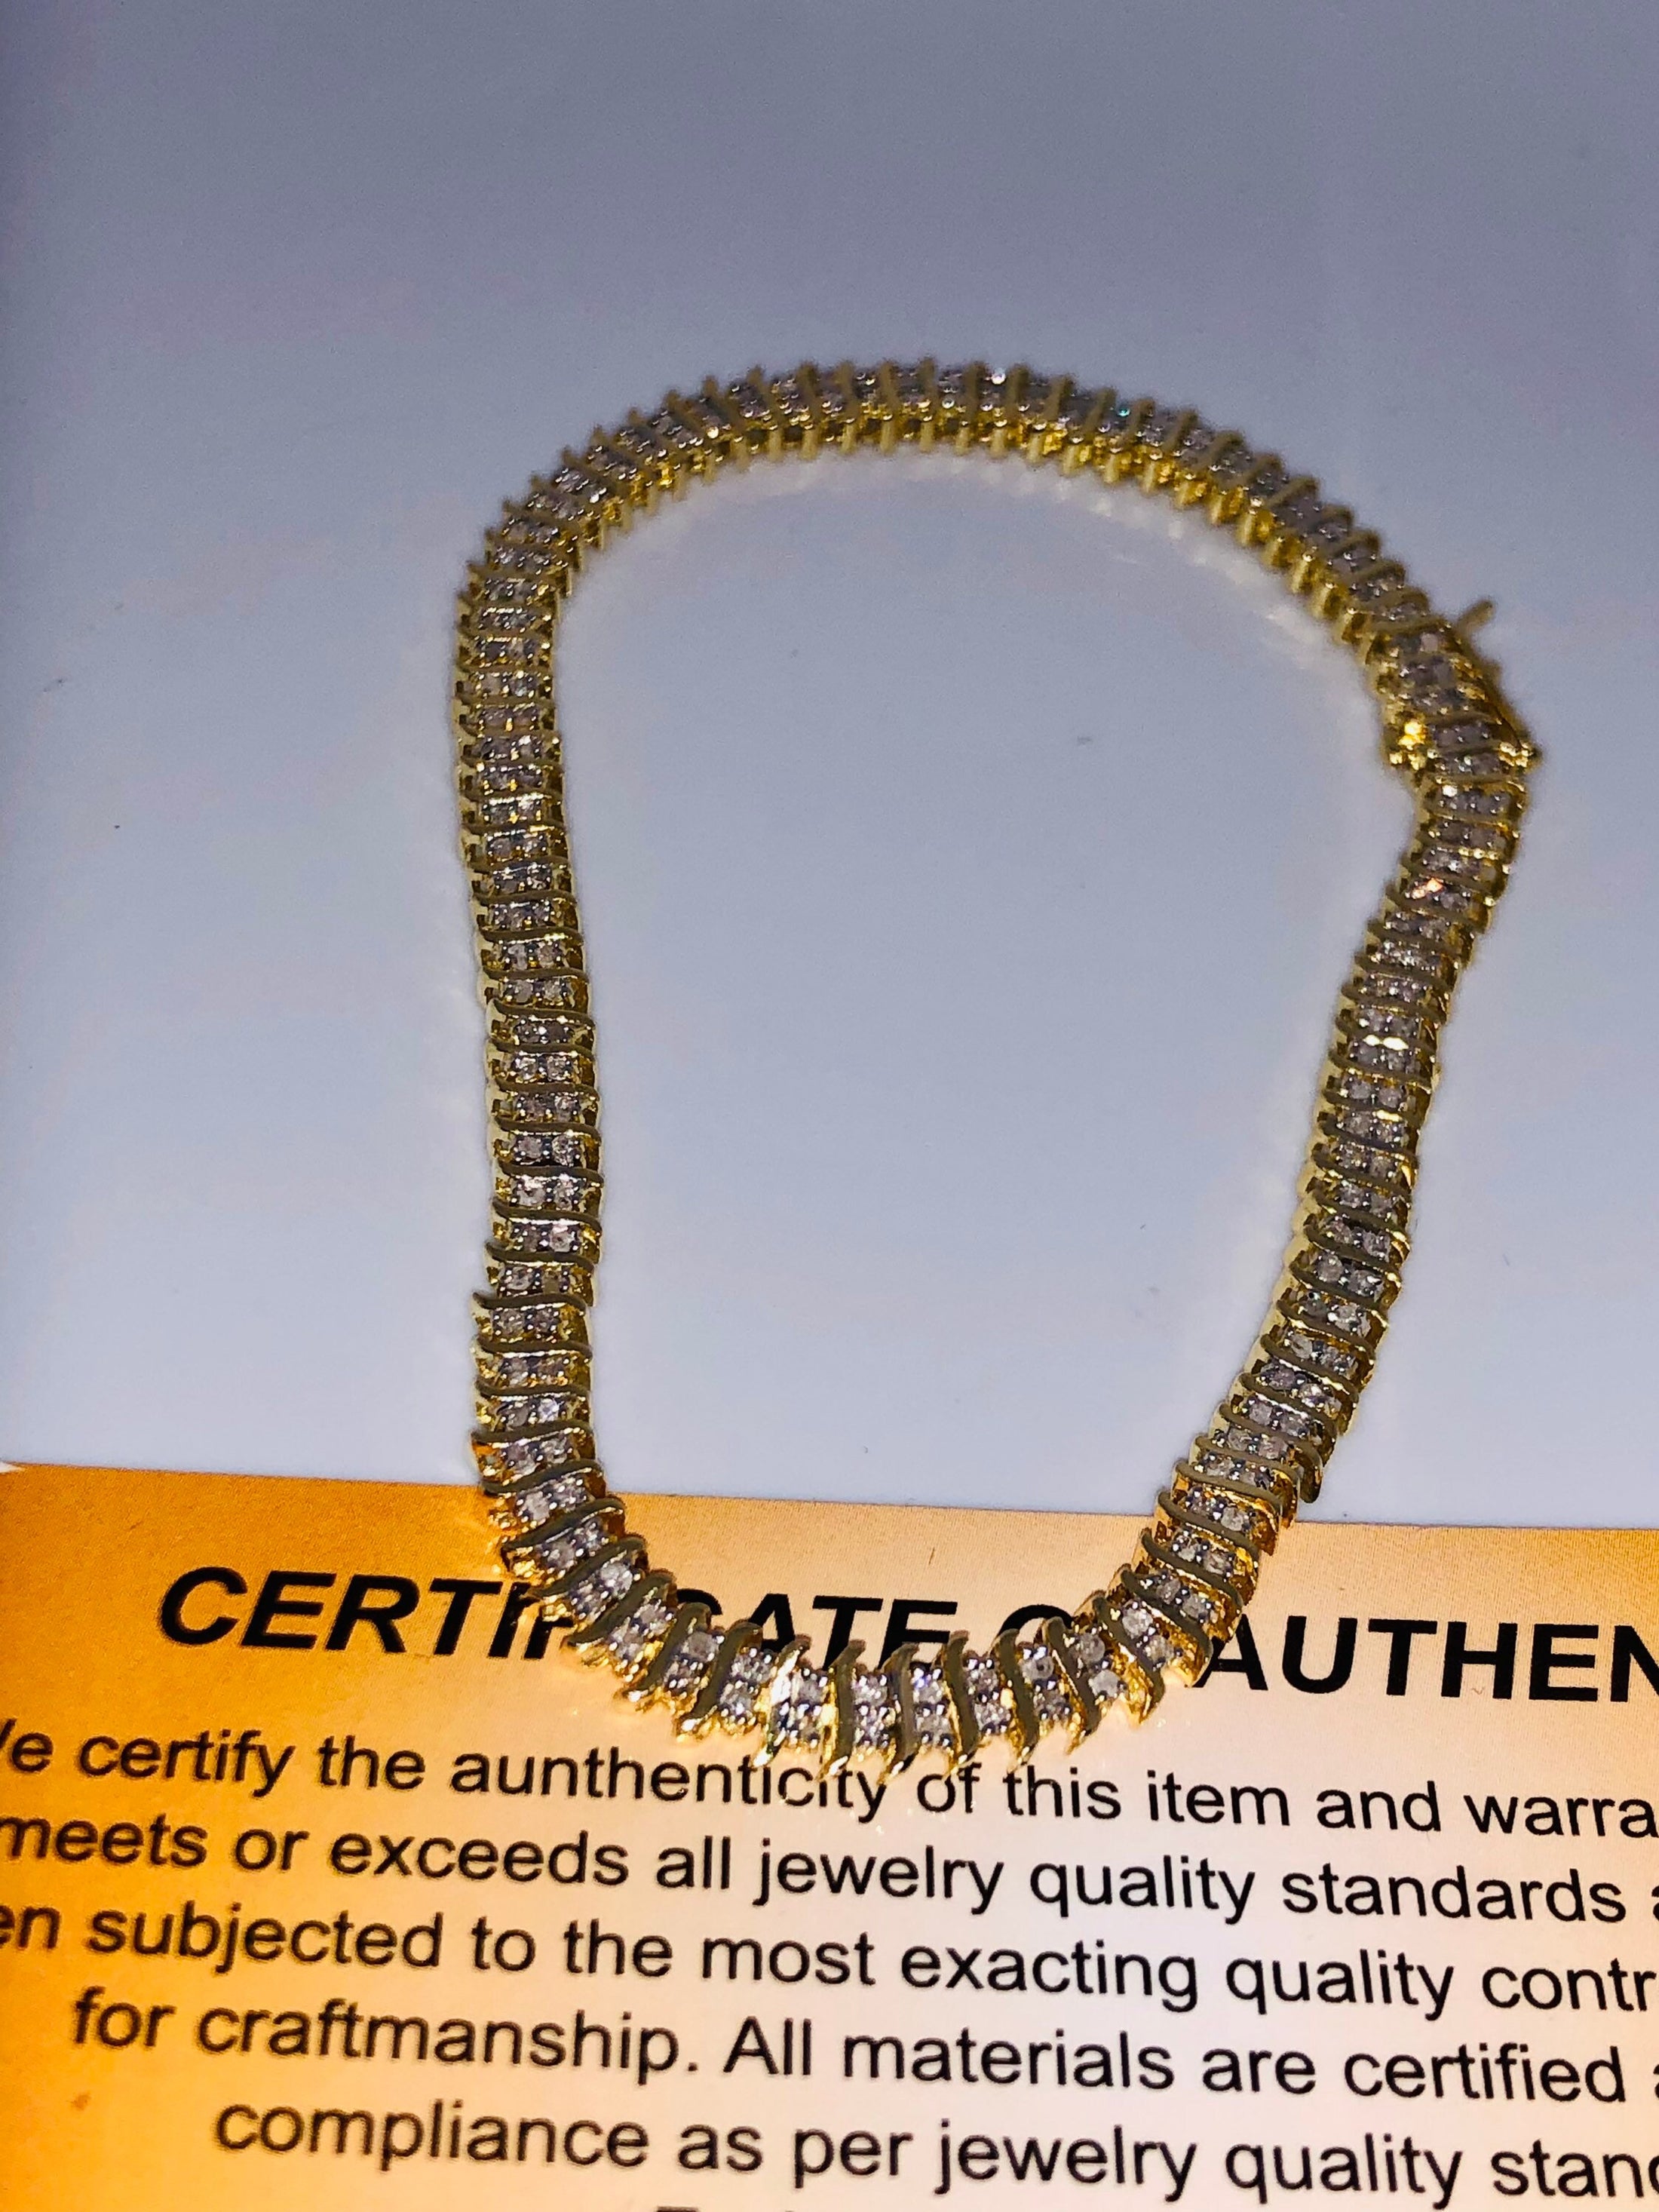 REAL Diamond Double row Tennis Bracelet Custom Made 1.25ct genuine natural diamonds not CZ not fake! Authenticity card & gift wrap included!